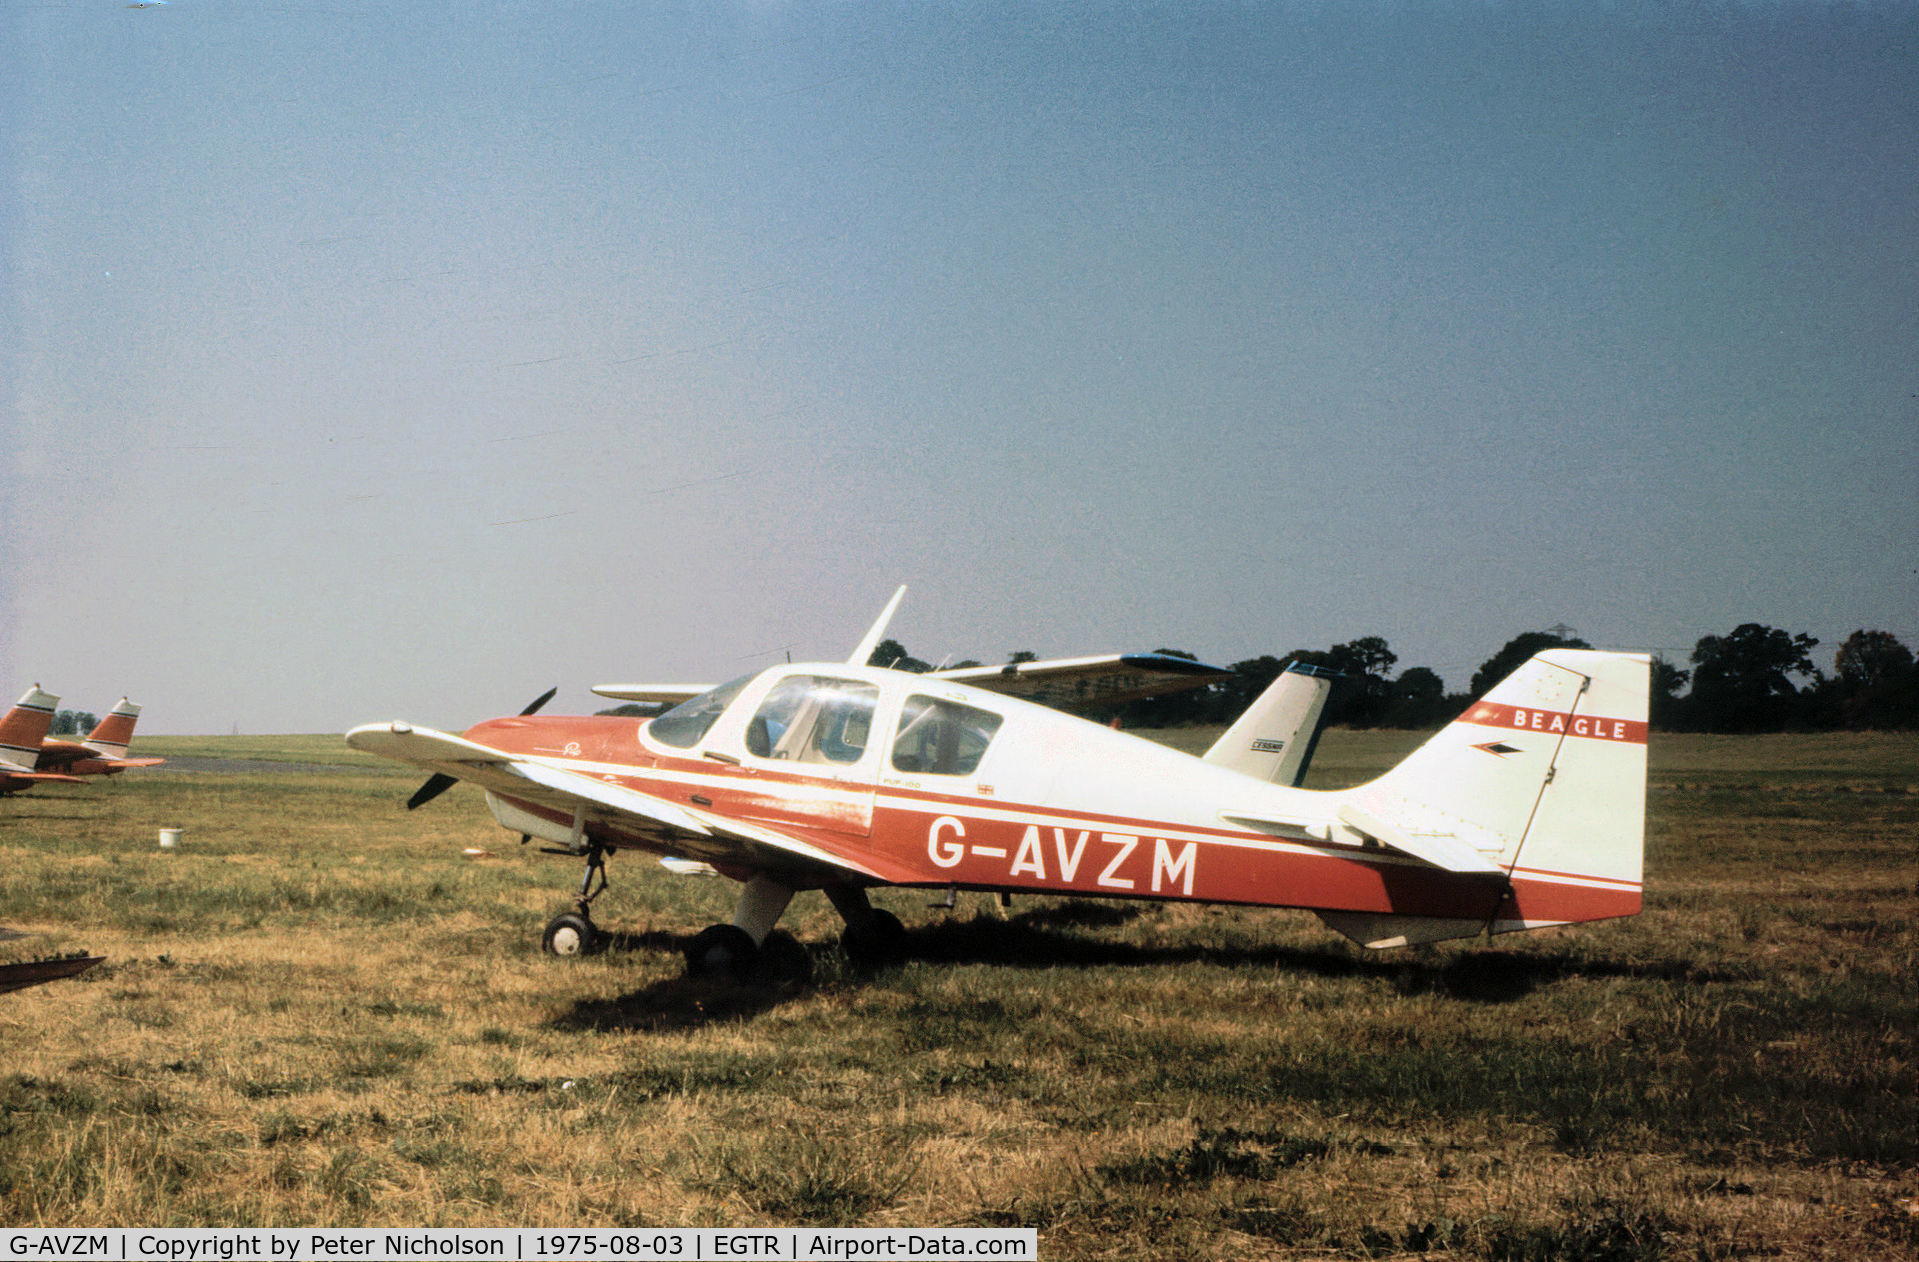 G-AVZM, 1968 Beagle B-121 Pup Series 1 (Pup 100) C/N B121-005, Beagle Pup Series 1 as seen at Elstree in the Summer of 1975.